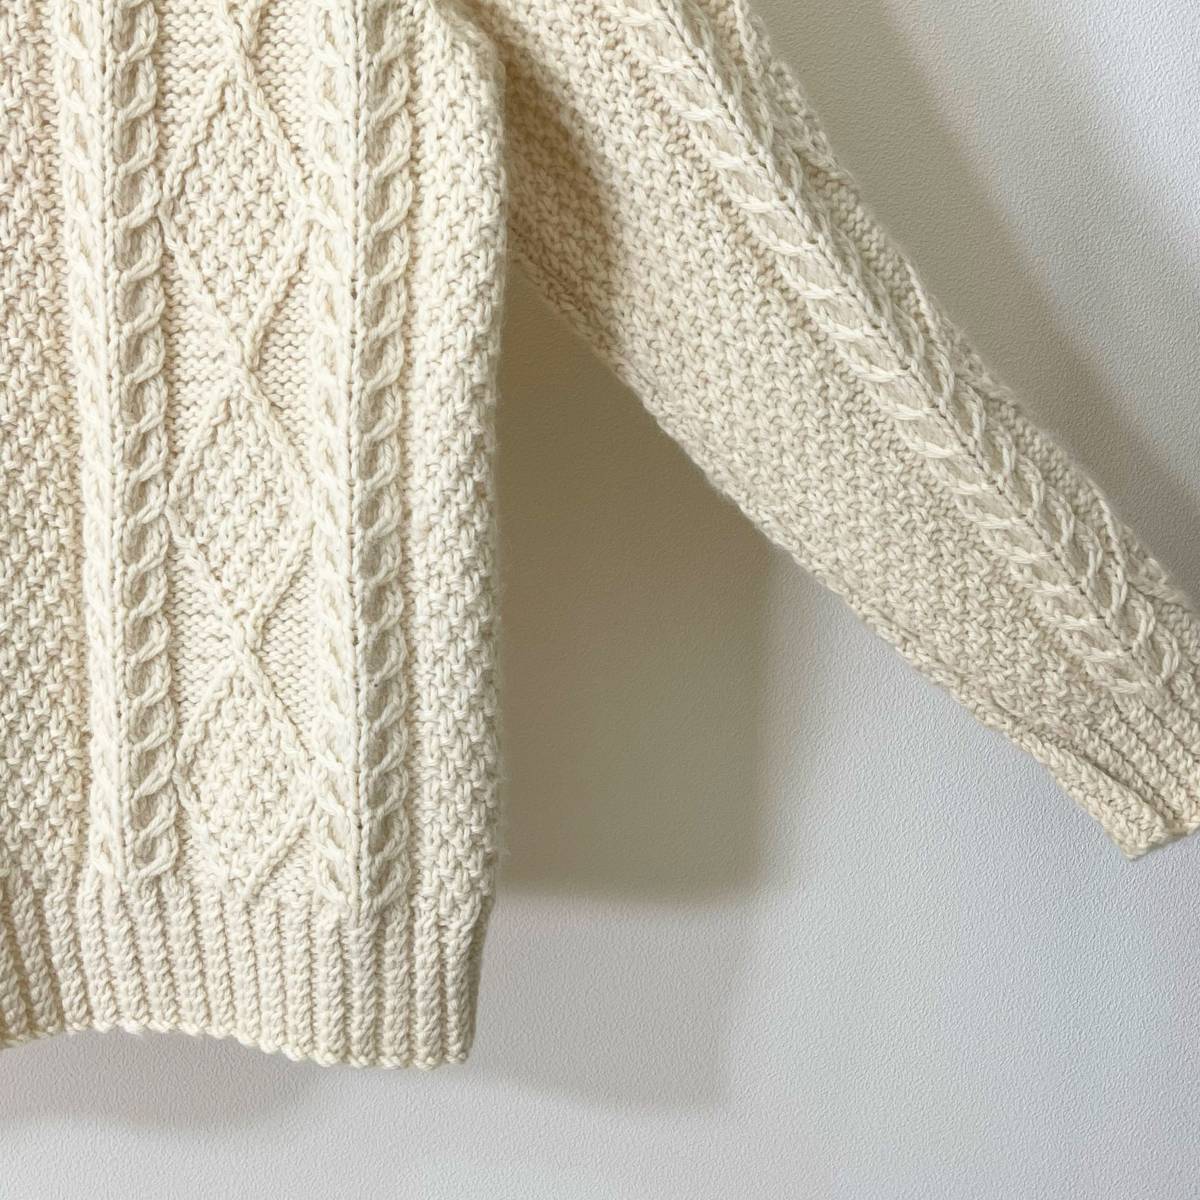  rare { Mint Condition / ABERCROMBIE&FITCH / 42 }60s70s finest quality goods [ Abercrombie & Fitch i-ll Land made hand knitted Vintage Alain sweater ]